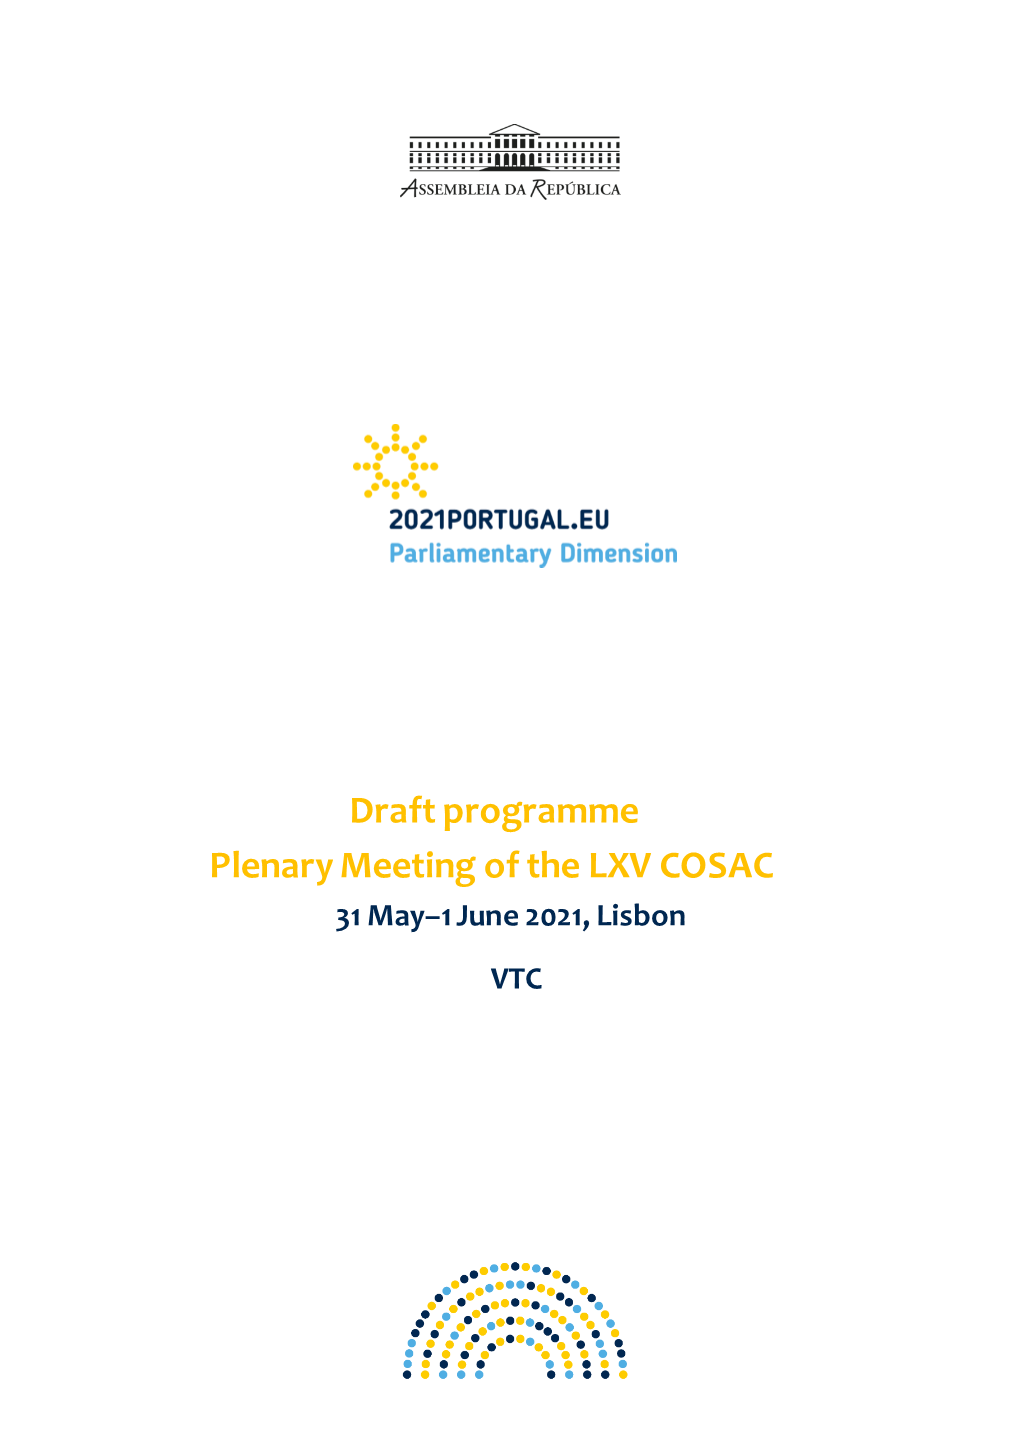 Draft Programme Plenary Meeting of the LXV COSAC